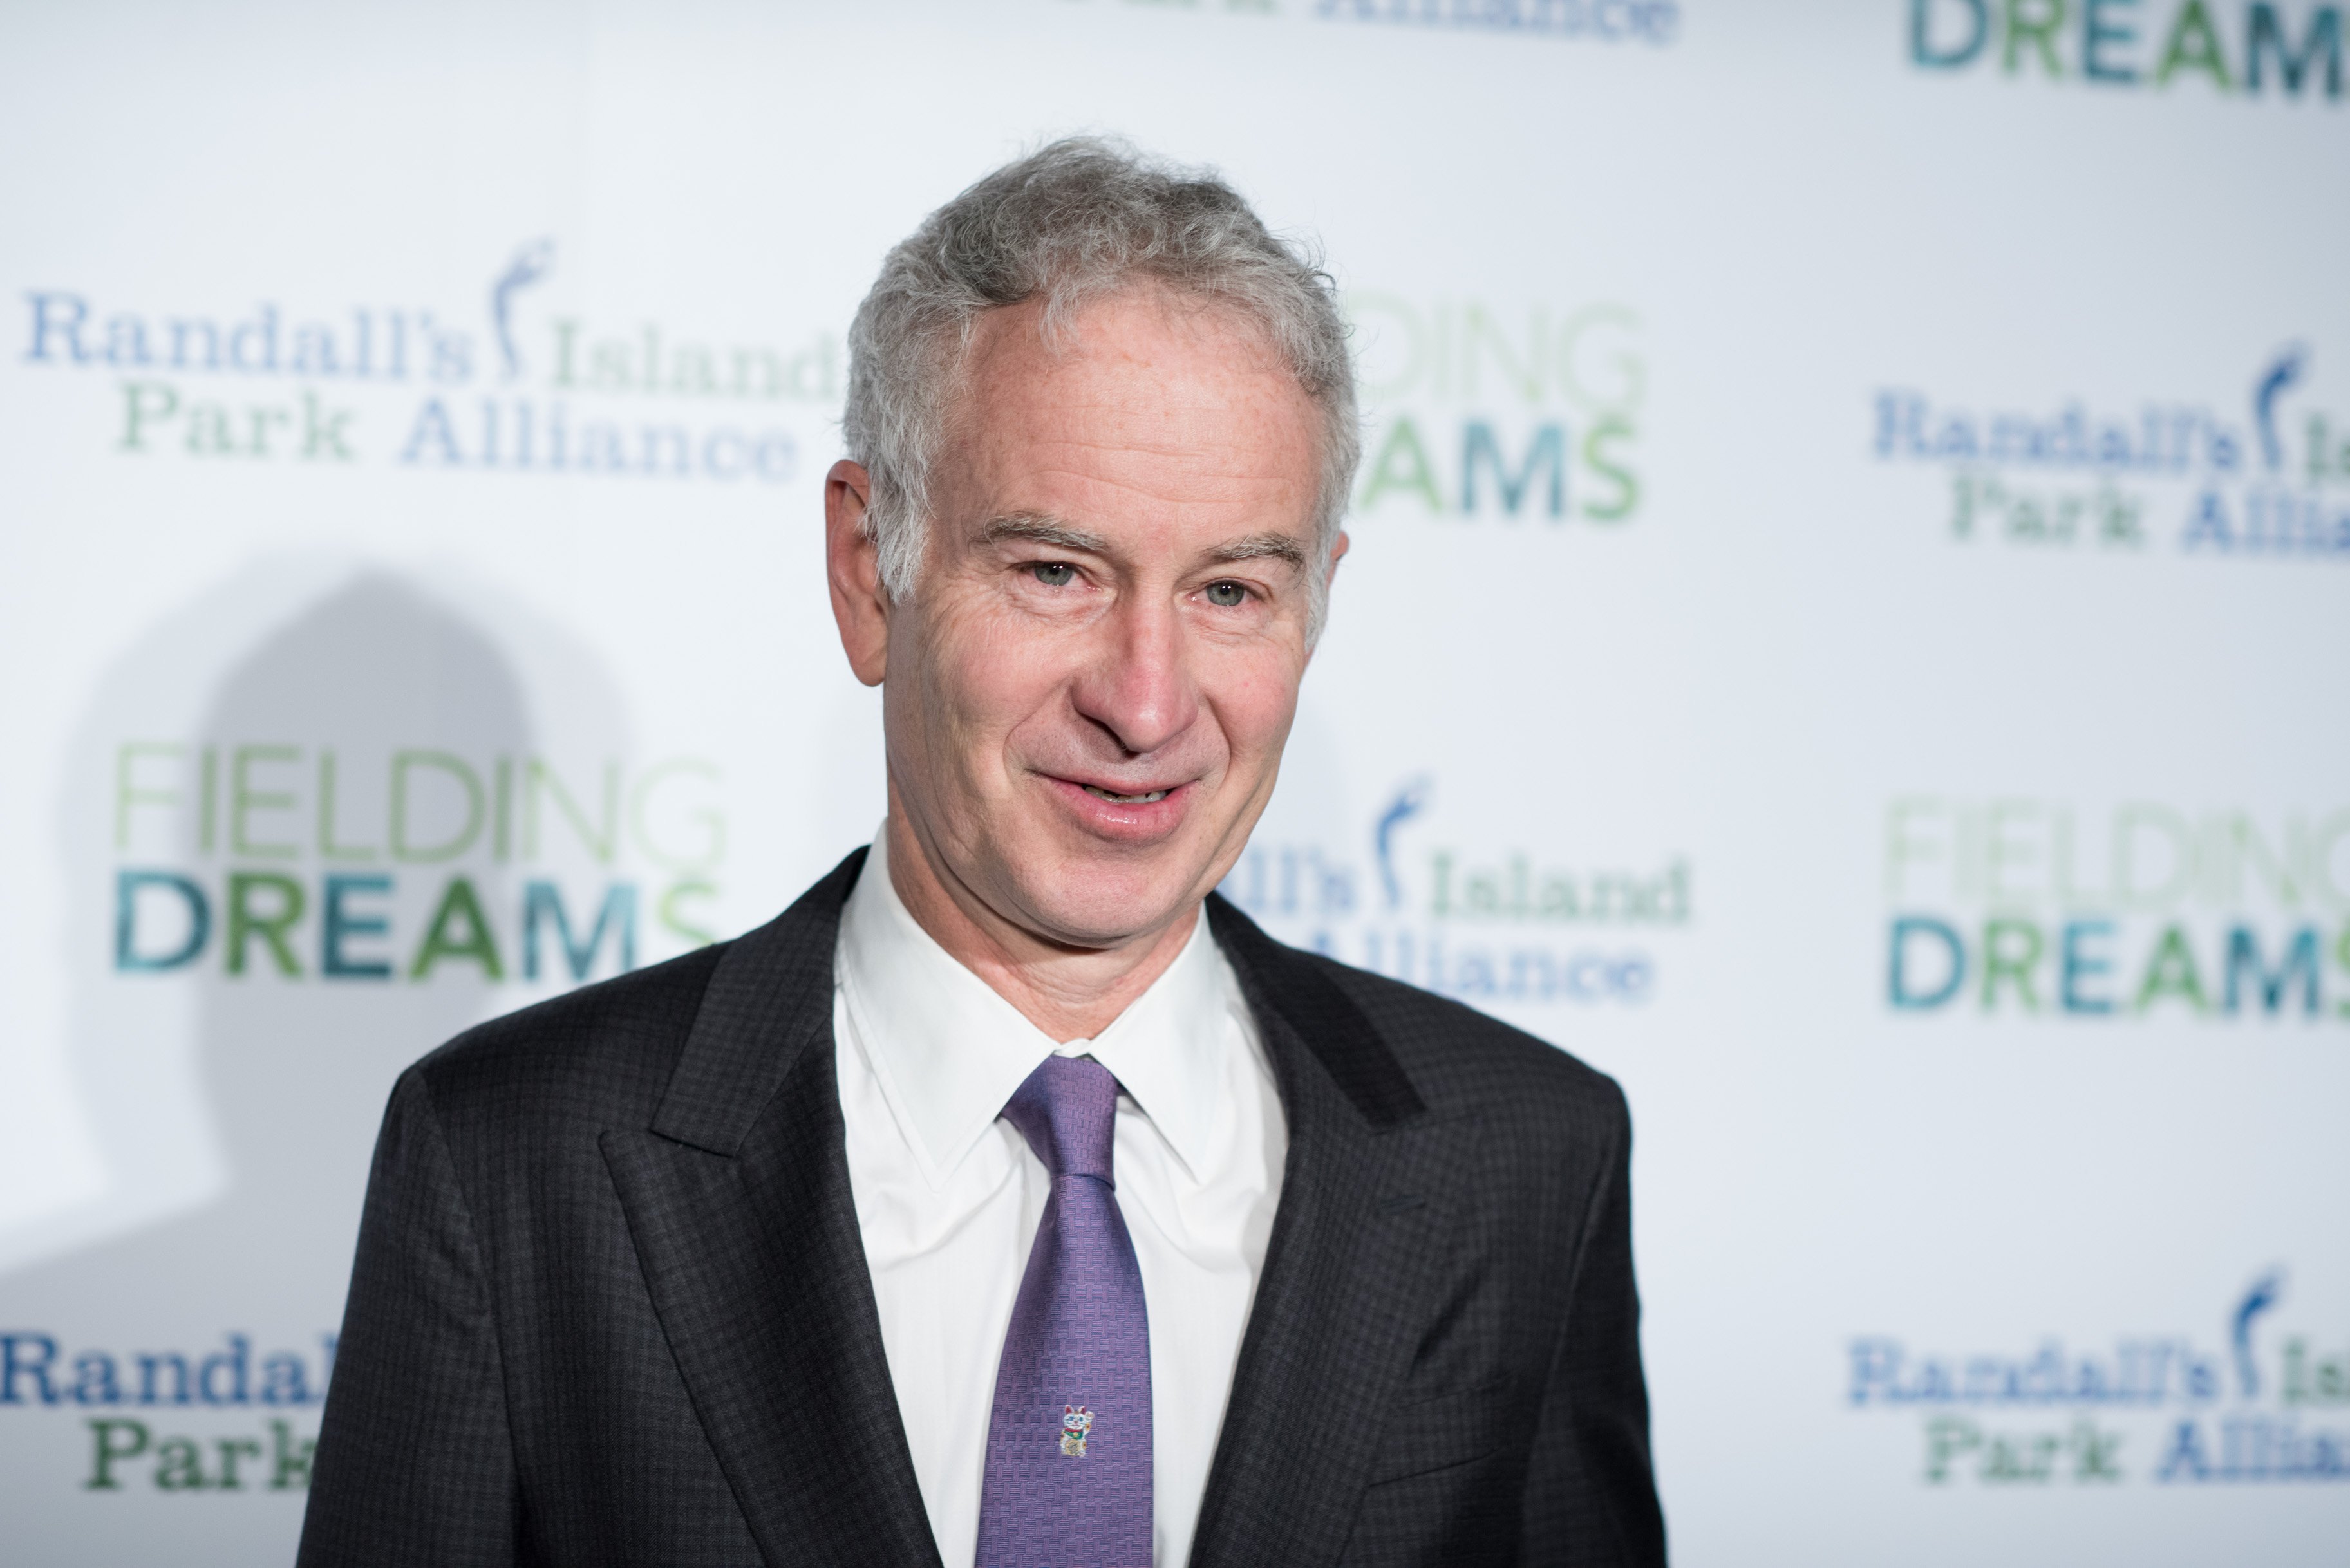  John McEnroe attends the 2016 Randall's Island Park Alliance Fielding Dreams Gala on March 8, 2016 in New York City. | Photo: Getty Images